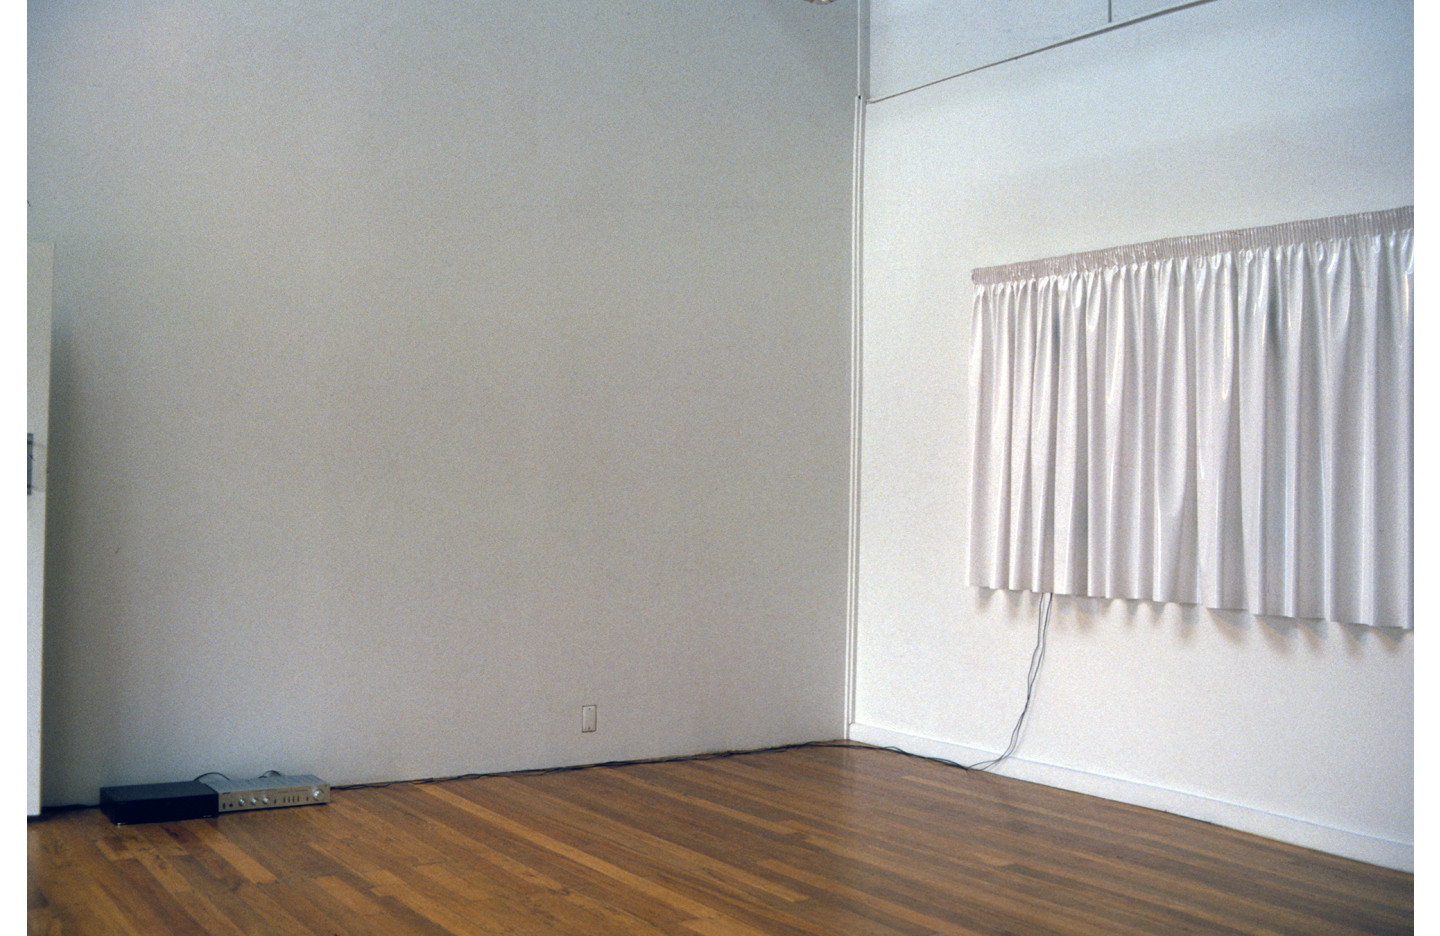 Scape, Ramp Gallery (2001)